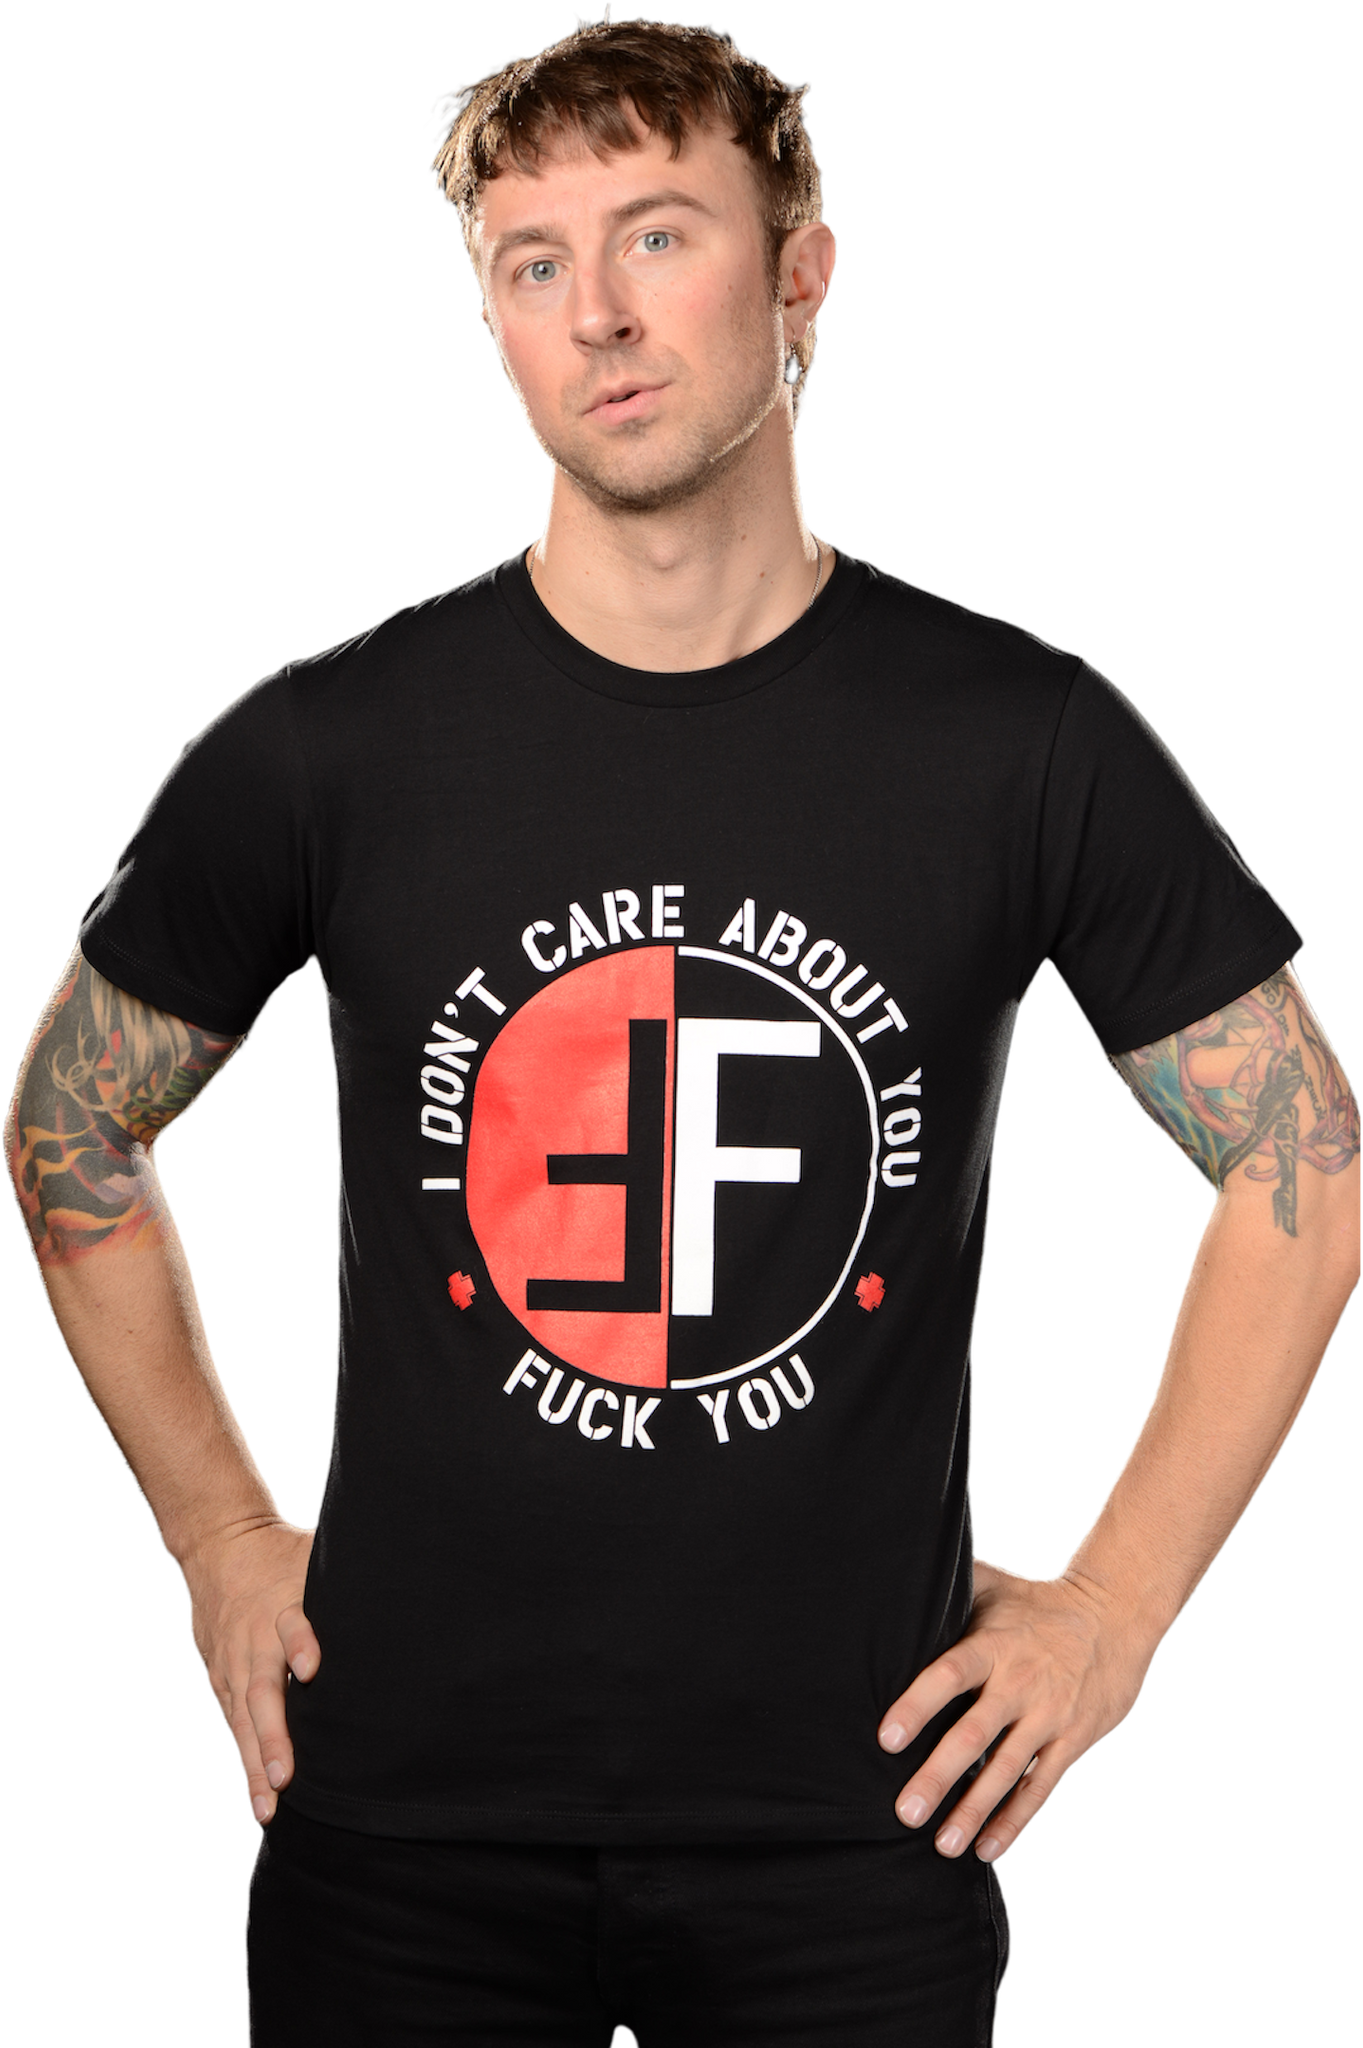 FEAR: "I DON'T CARE ABOUT YOU" T-SHIRT